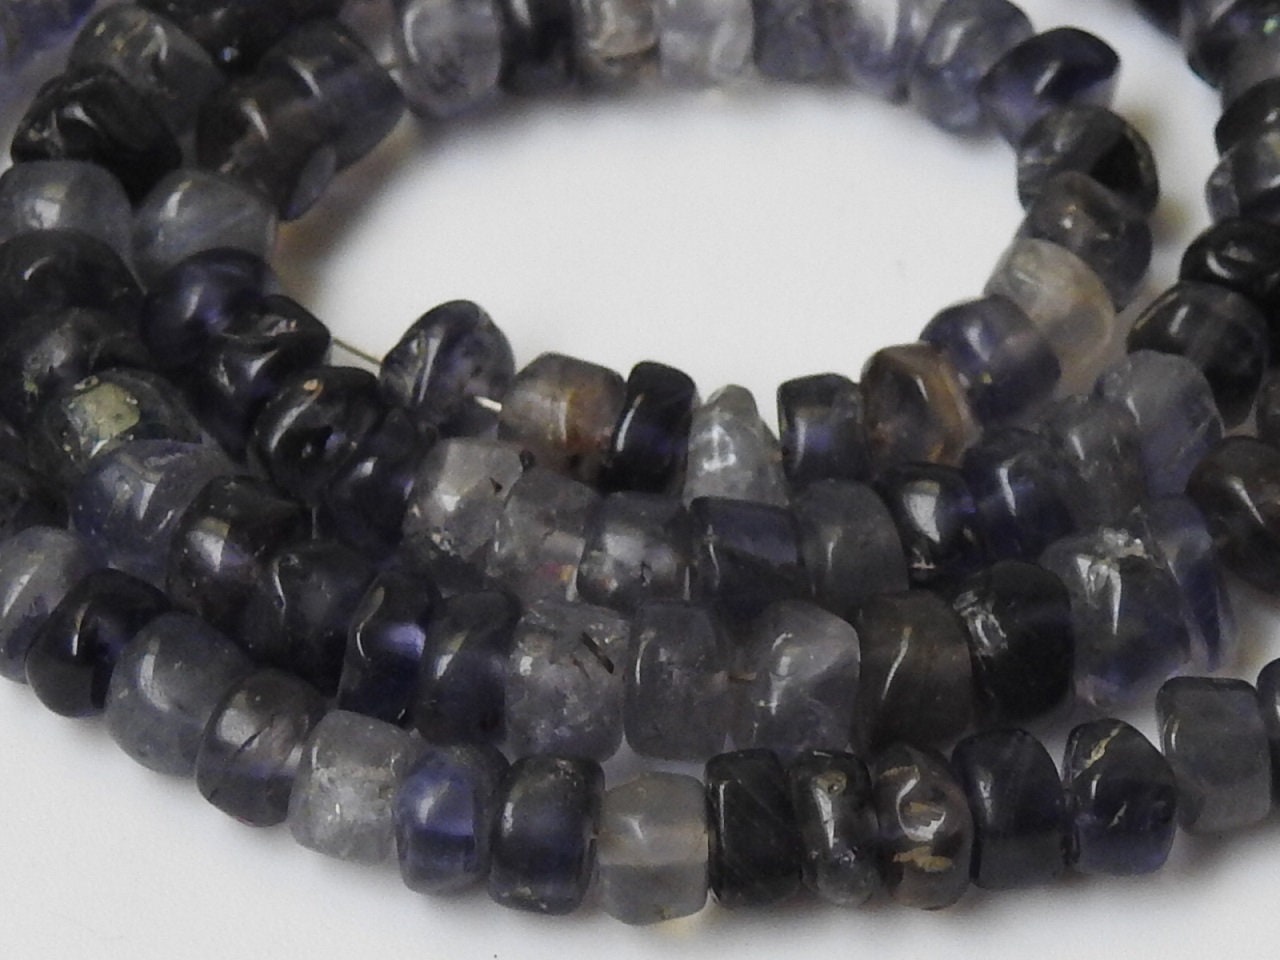 Natural Blue Iolite Smooth Handmade Beads,Roundel Shape,Loose Stone,For Making Jewelry,Wholesale Price,New Arrival,16Inch Strand B10 | Save 33% - Rajasthan Living 17